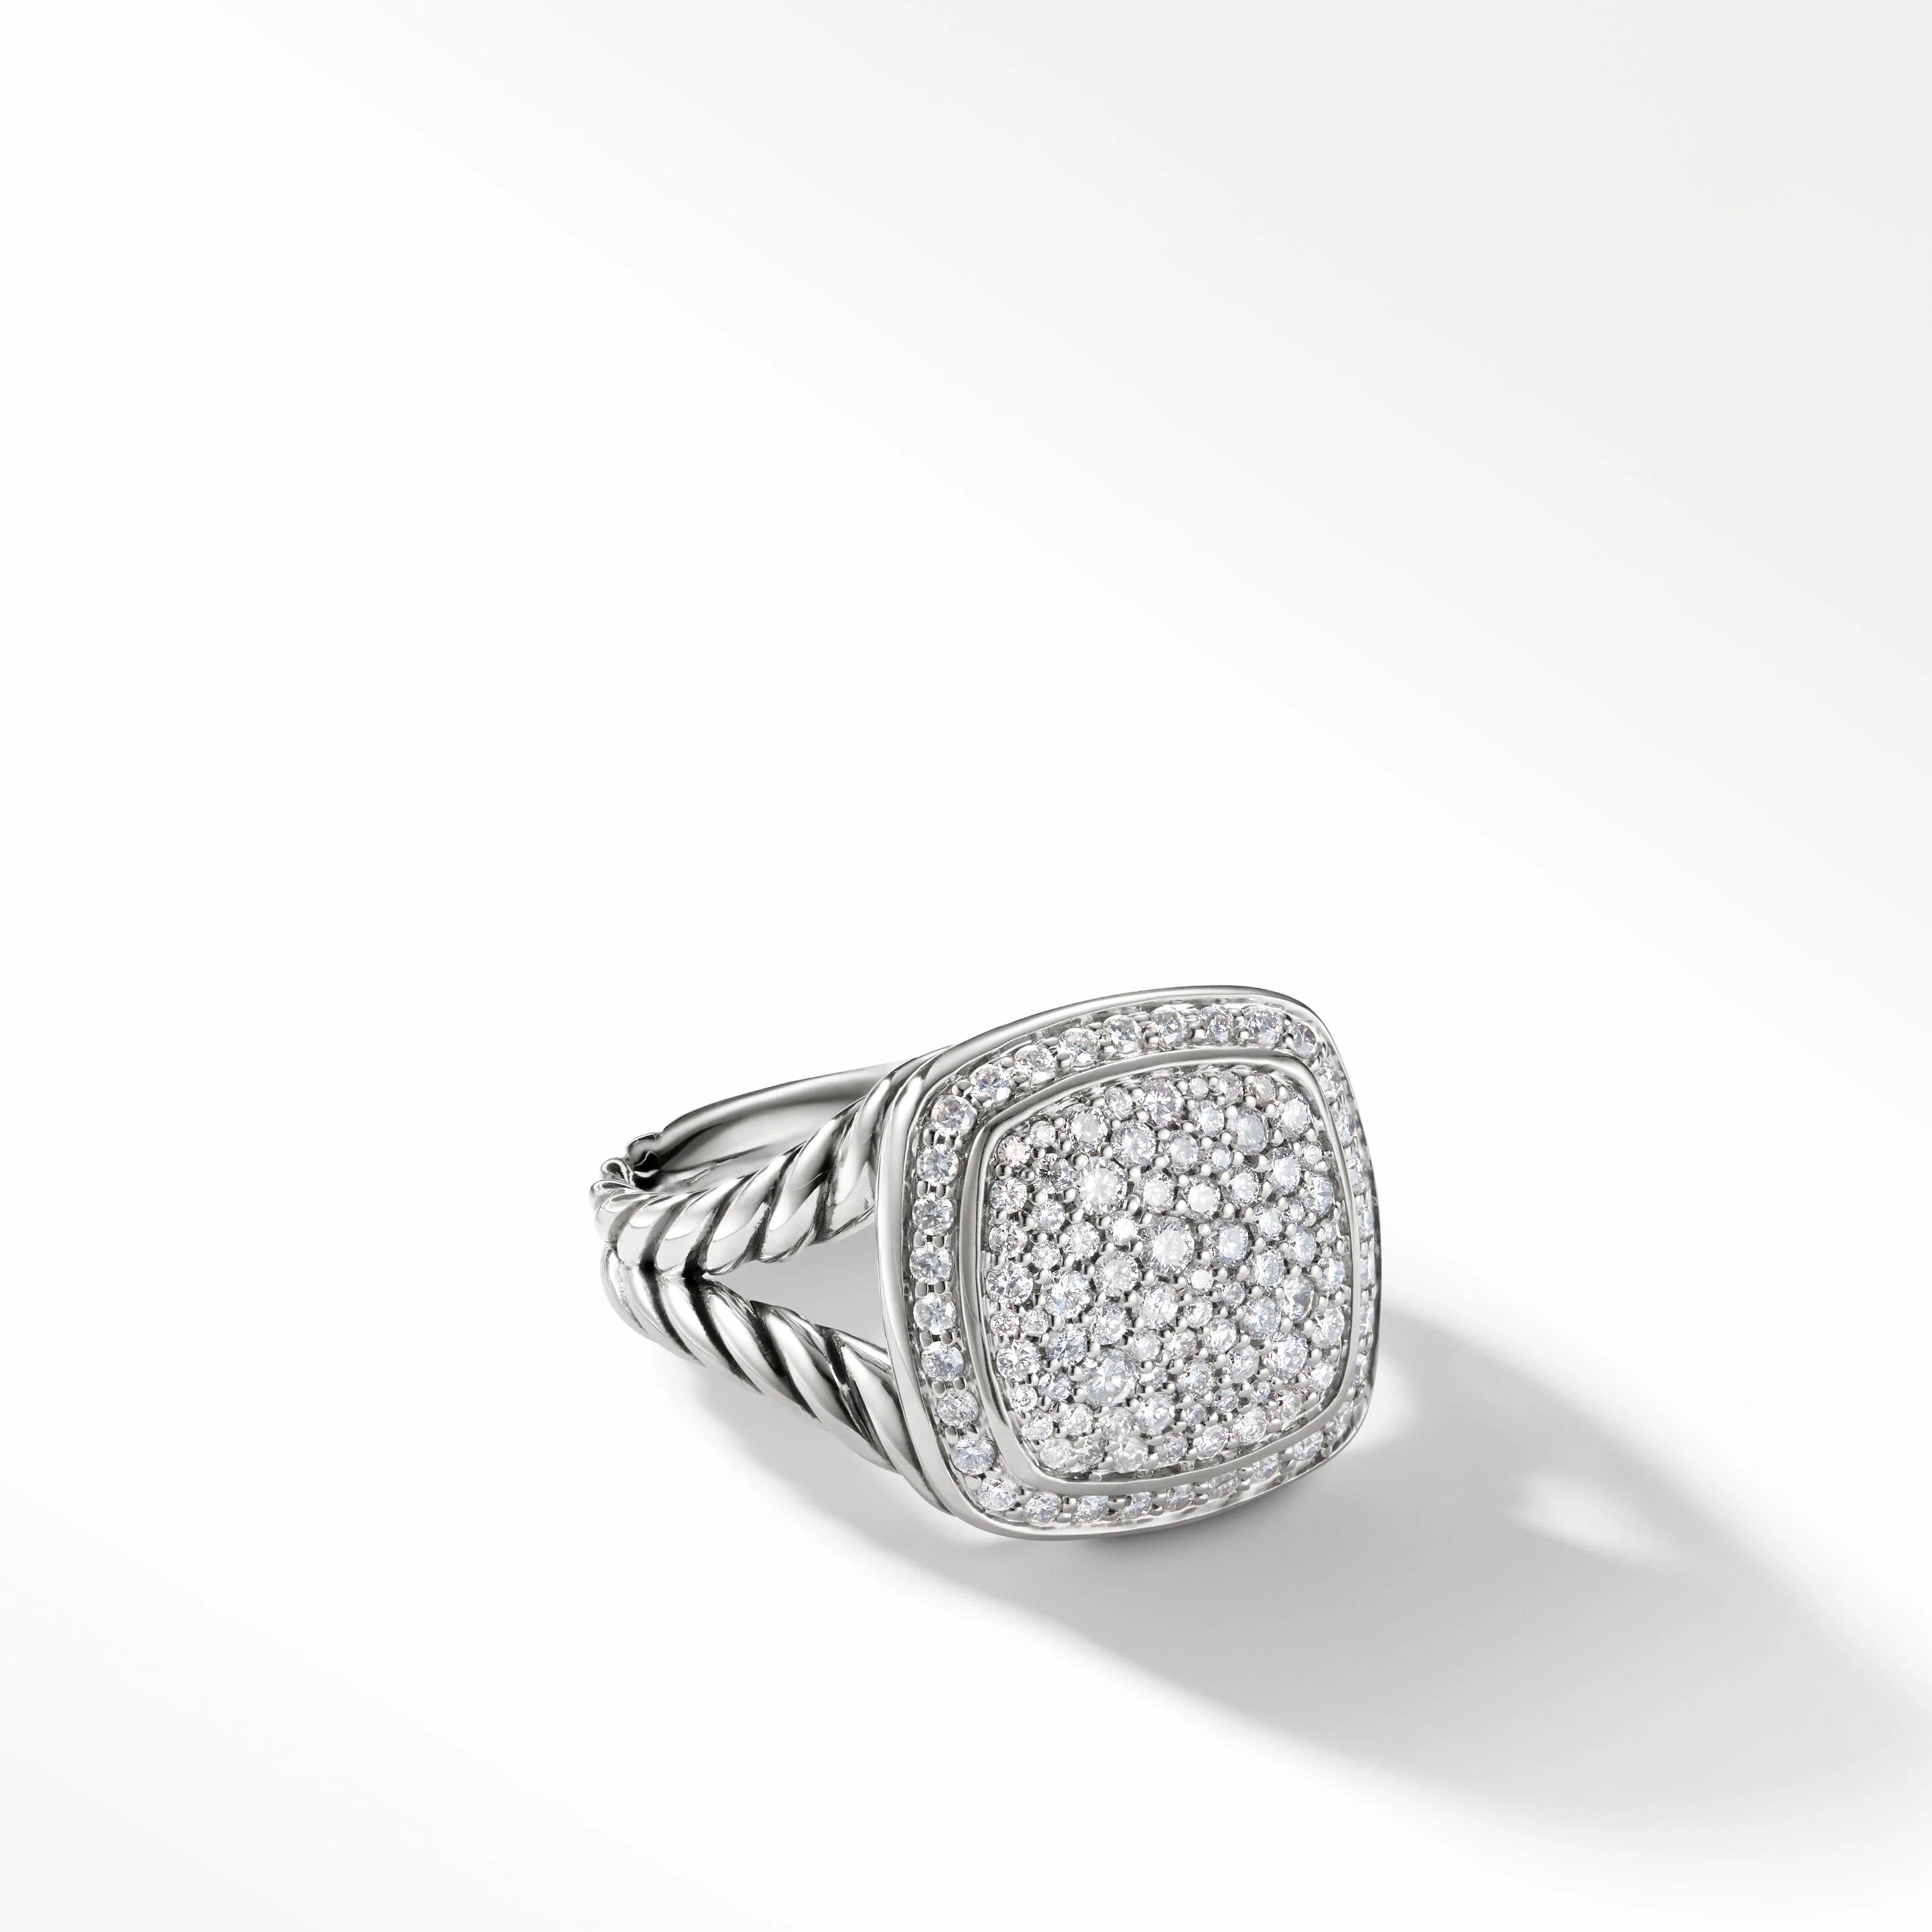 Albion® Ring in Sterling Silver with Pavé Diamonds | David Yurman